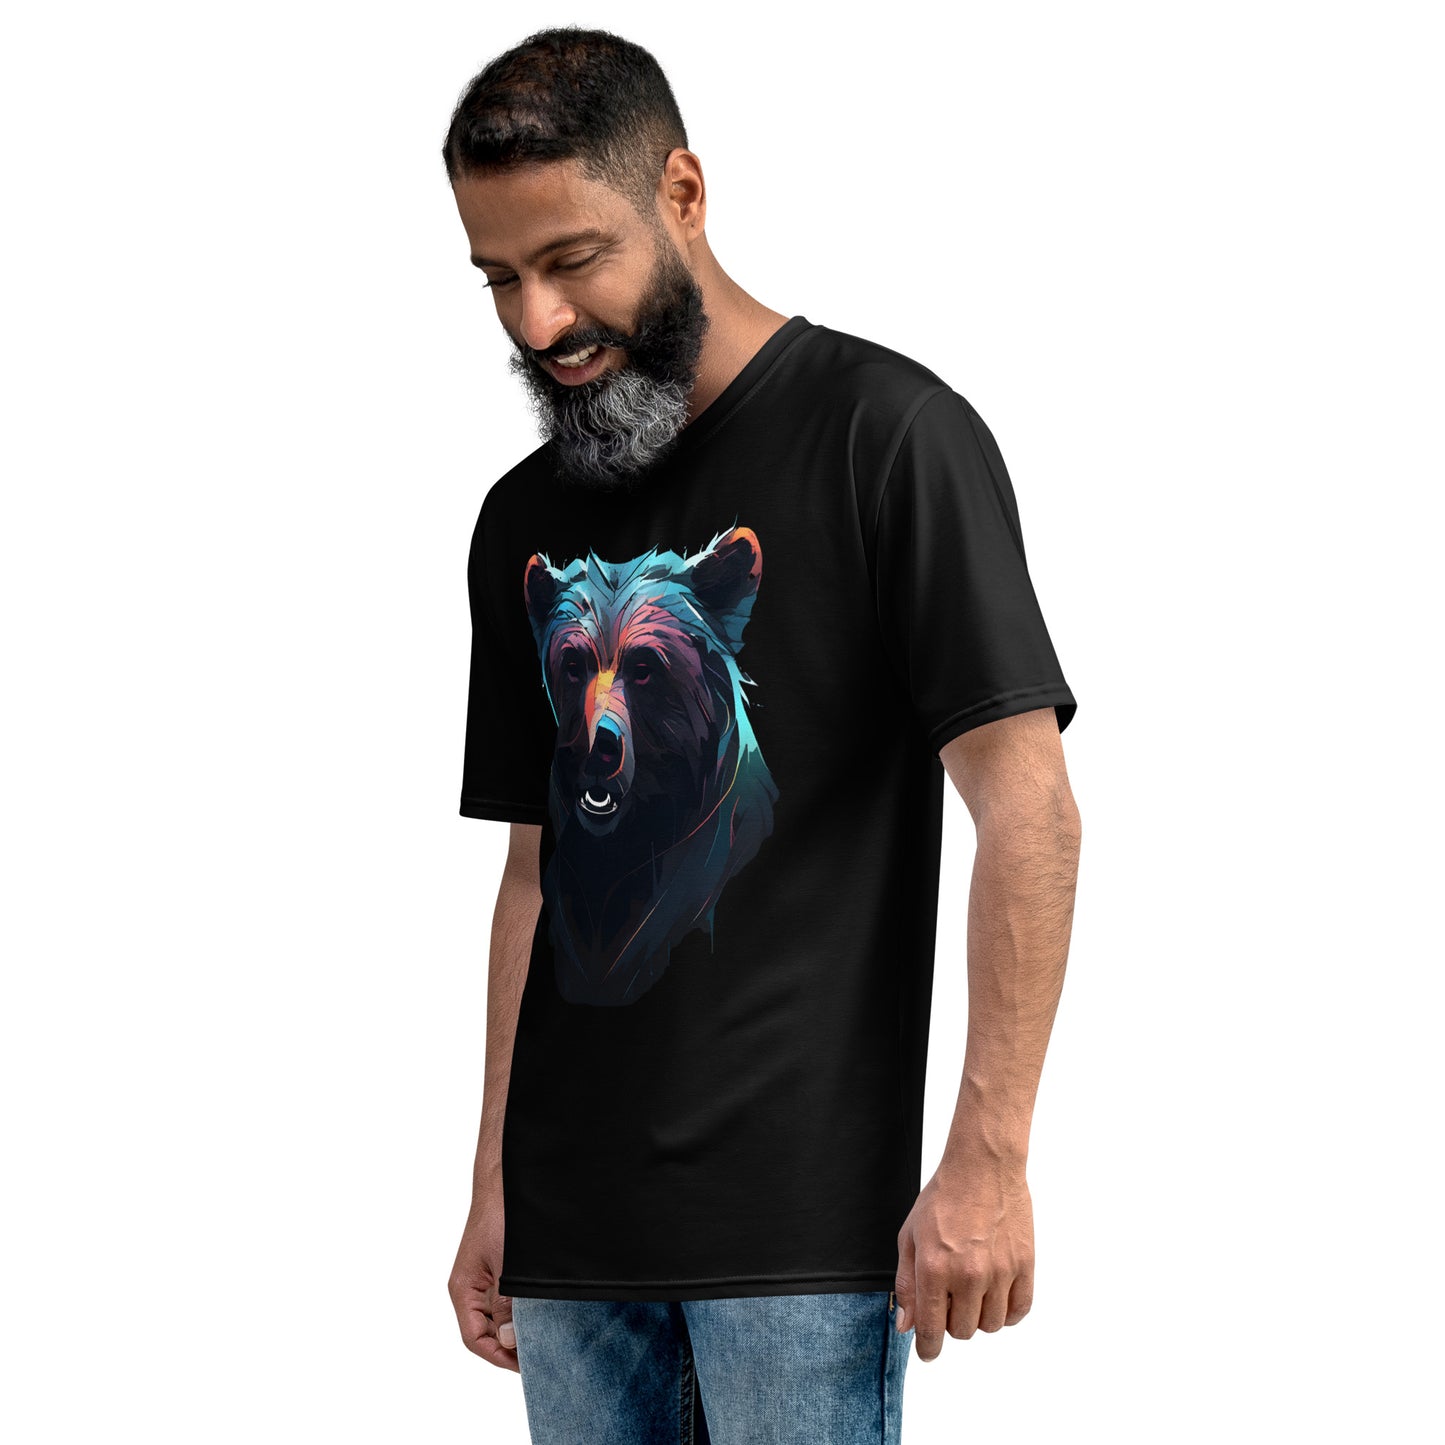 Iridescent Grizzly All Over Print Men's T-Shirt